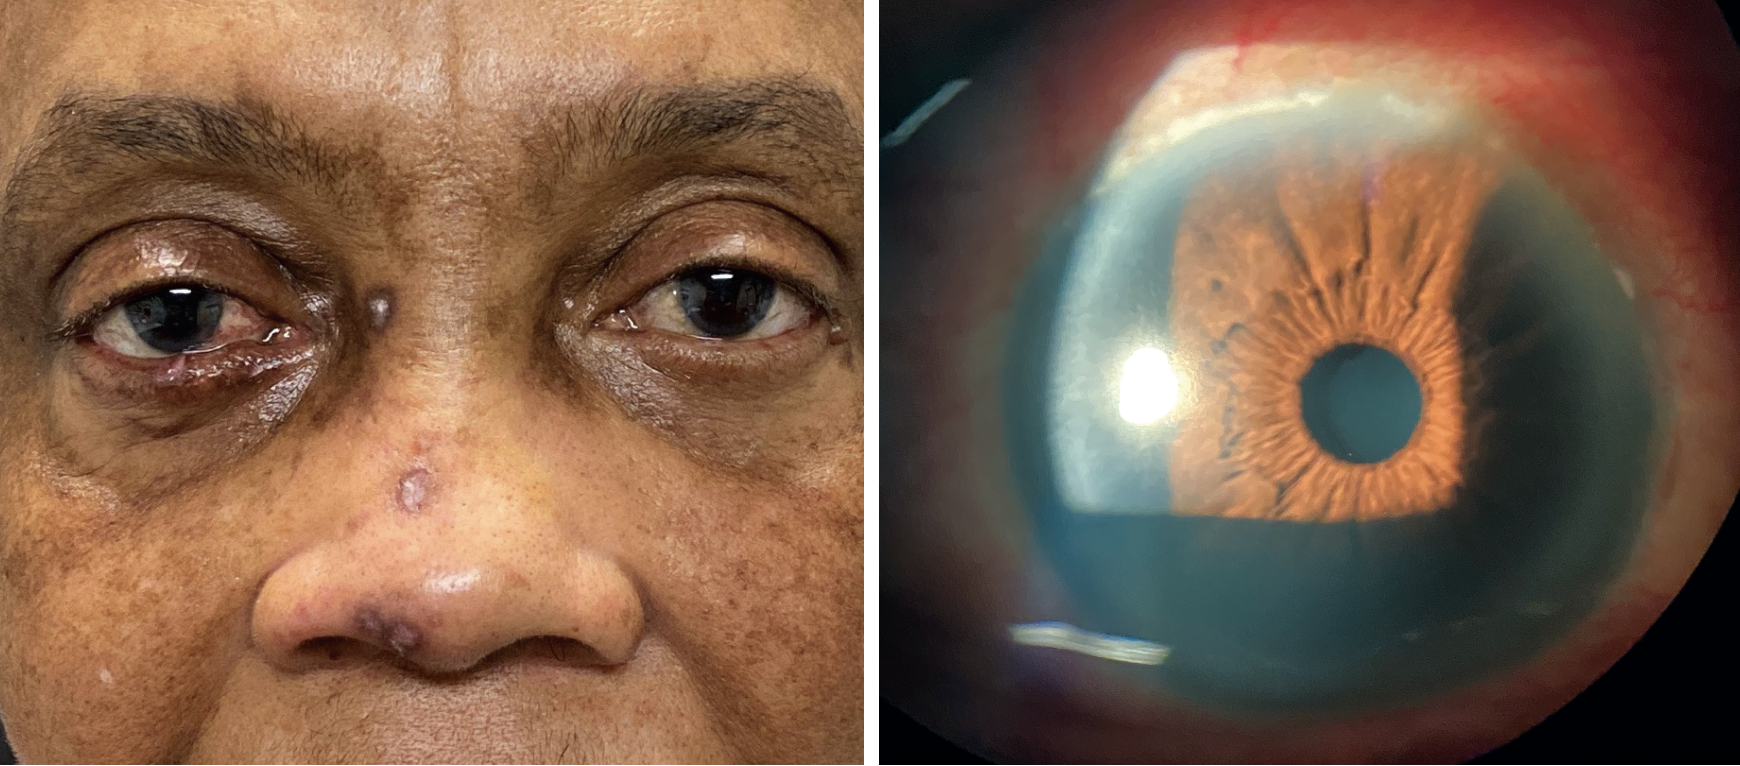 Is there anything in the patient’s ocular or non-ocular presentation that suggests the nature of her condition?